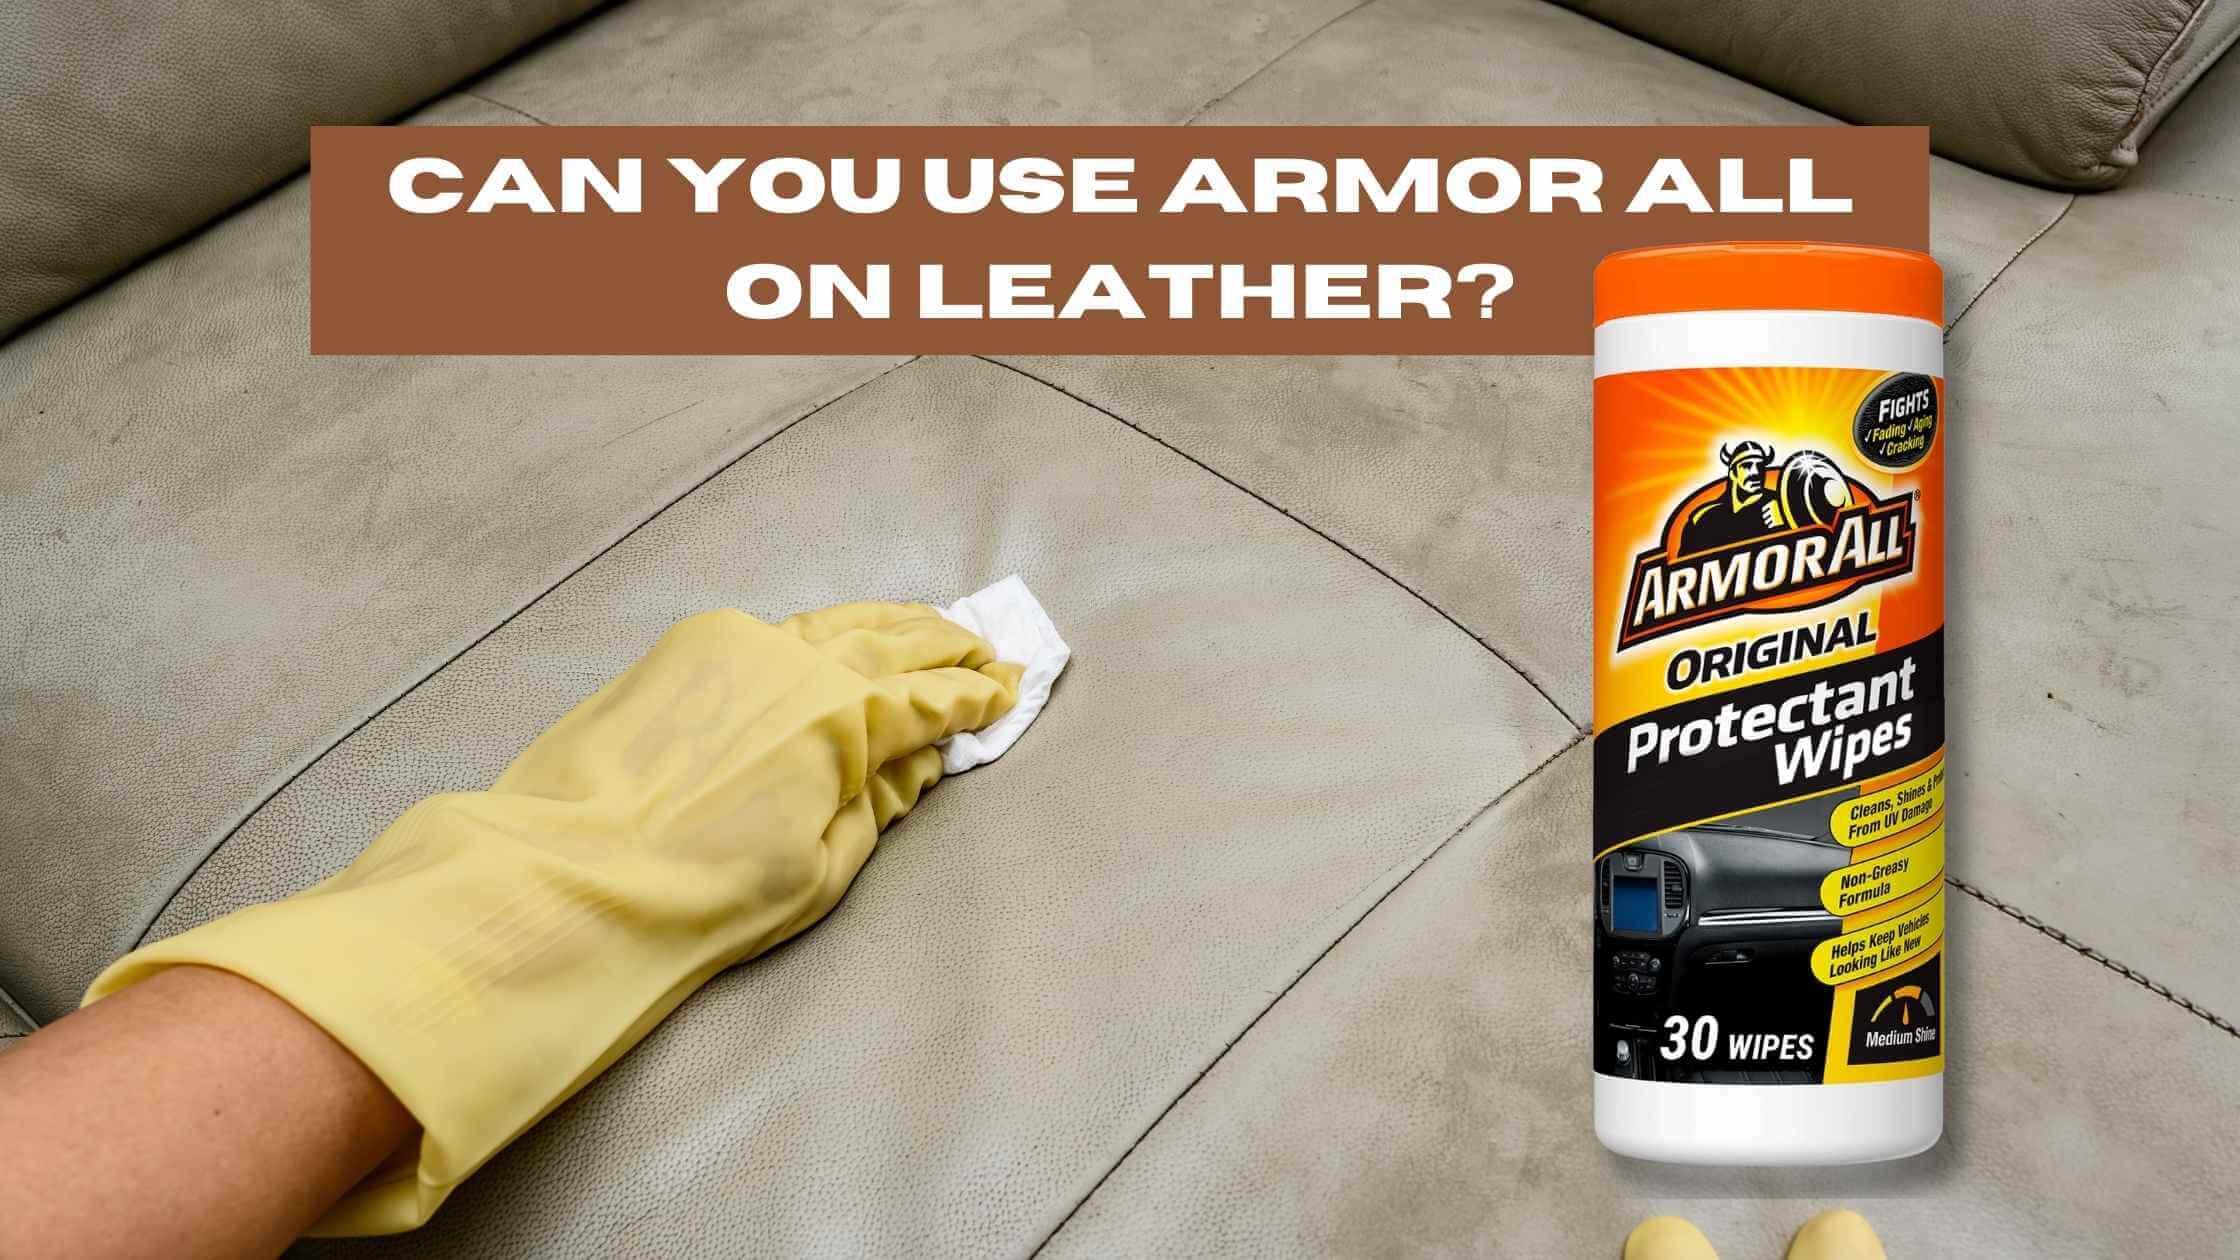 Can You Use Armor All on Leather